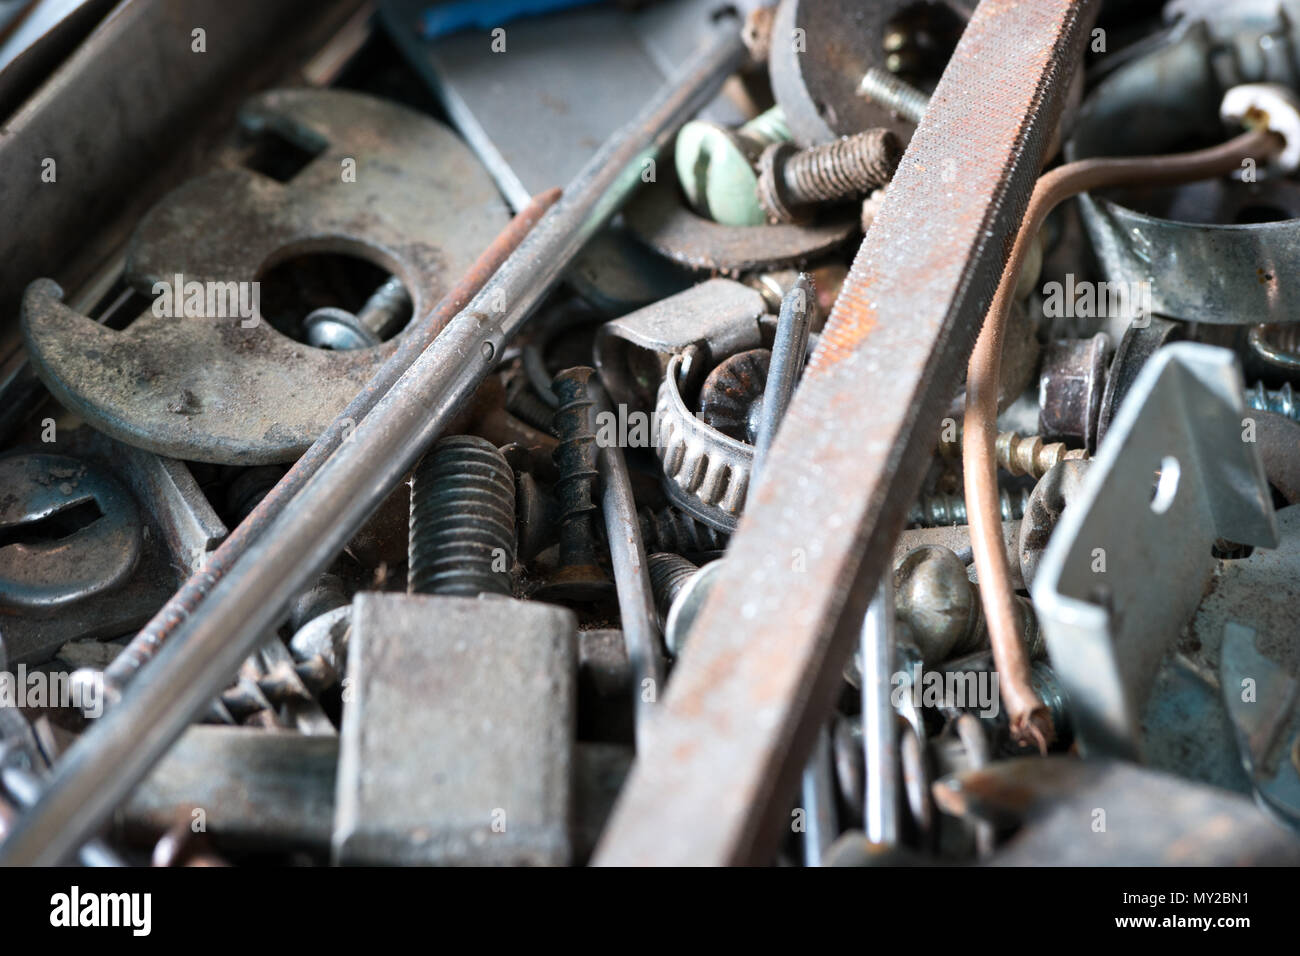 Various metal tools in the garage close up Stock Photo